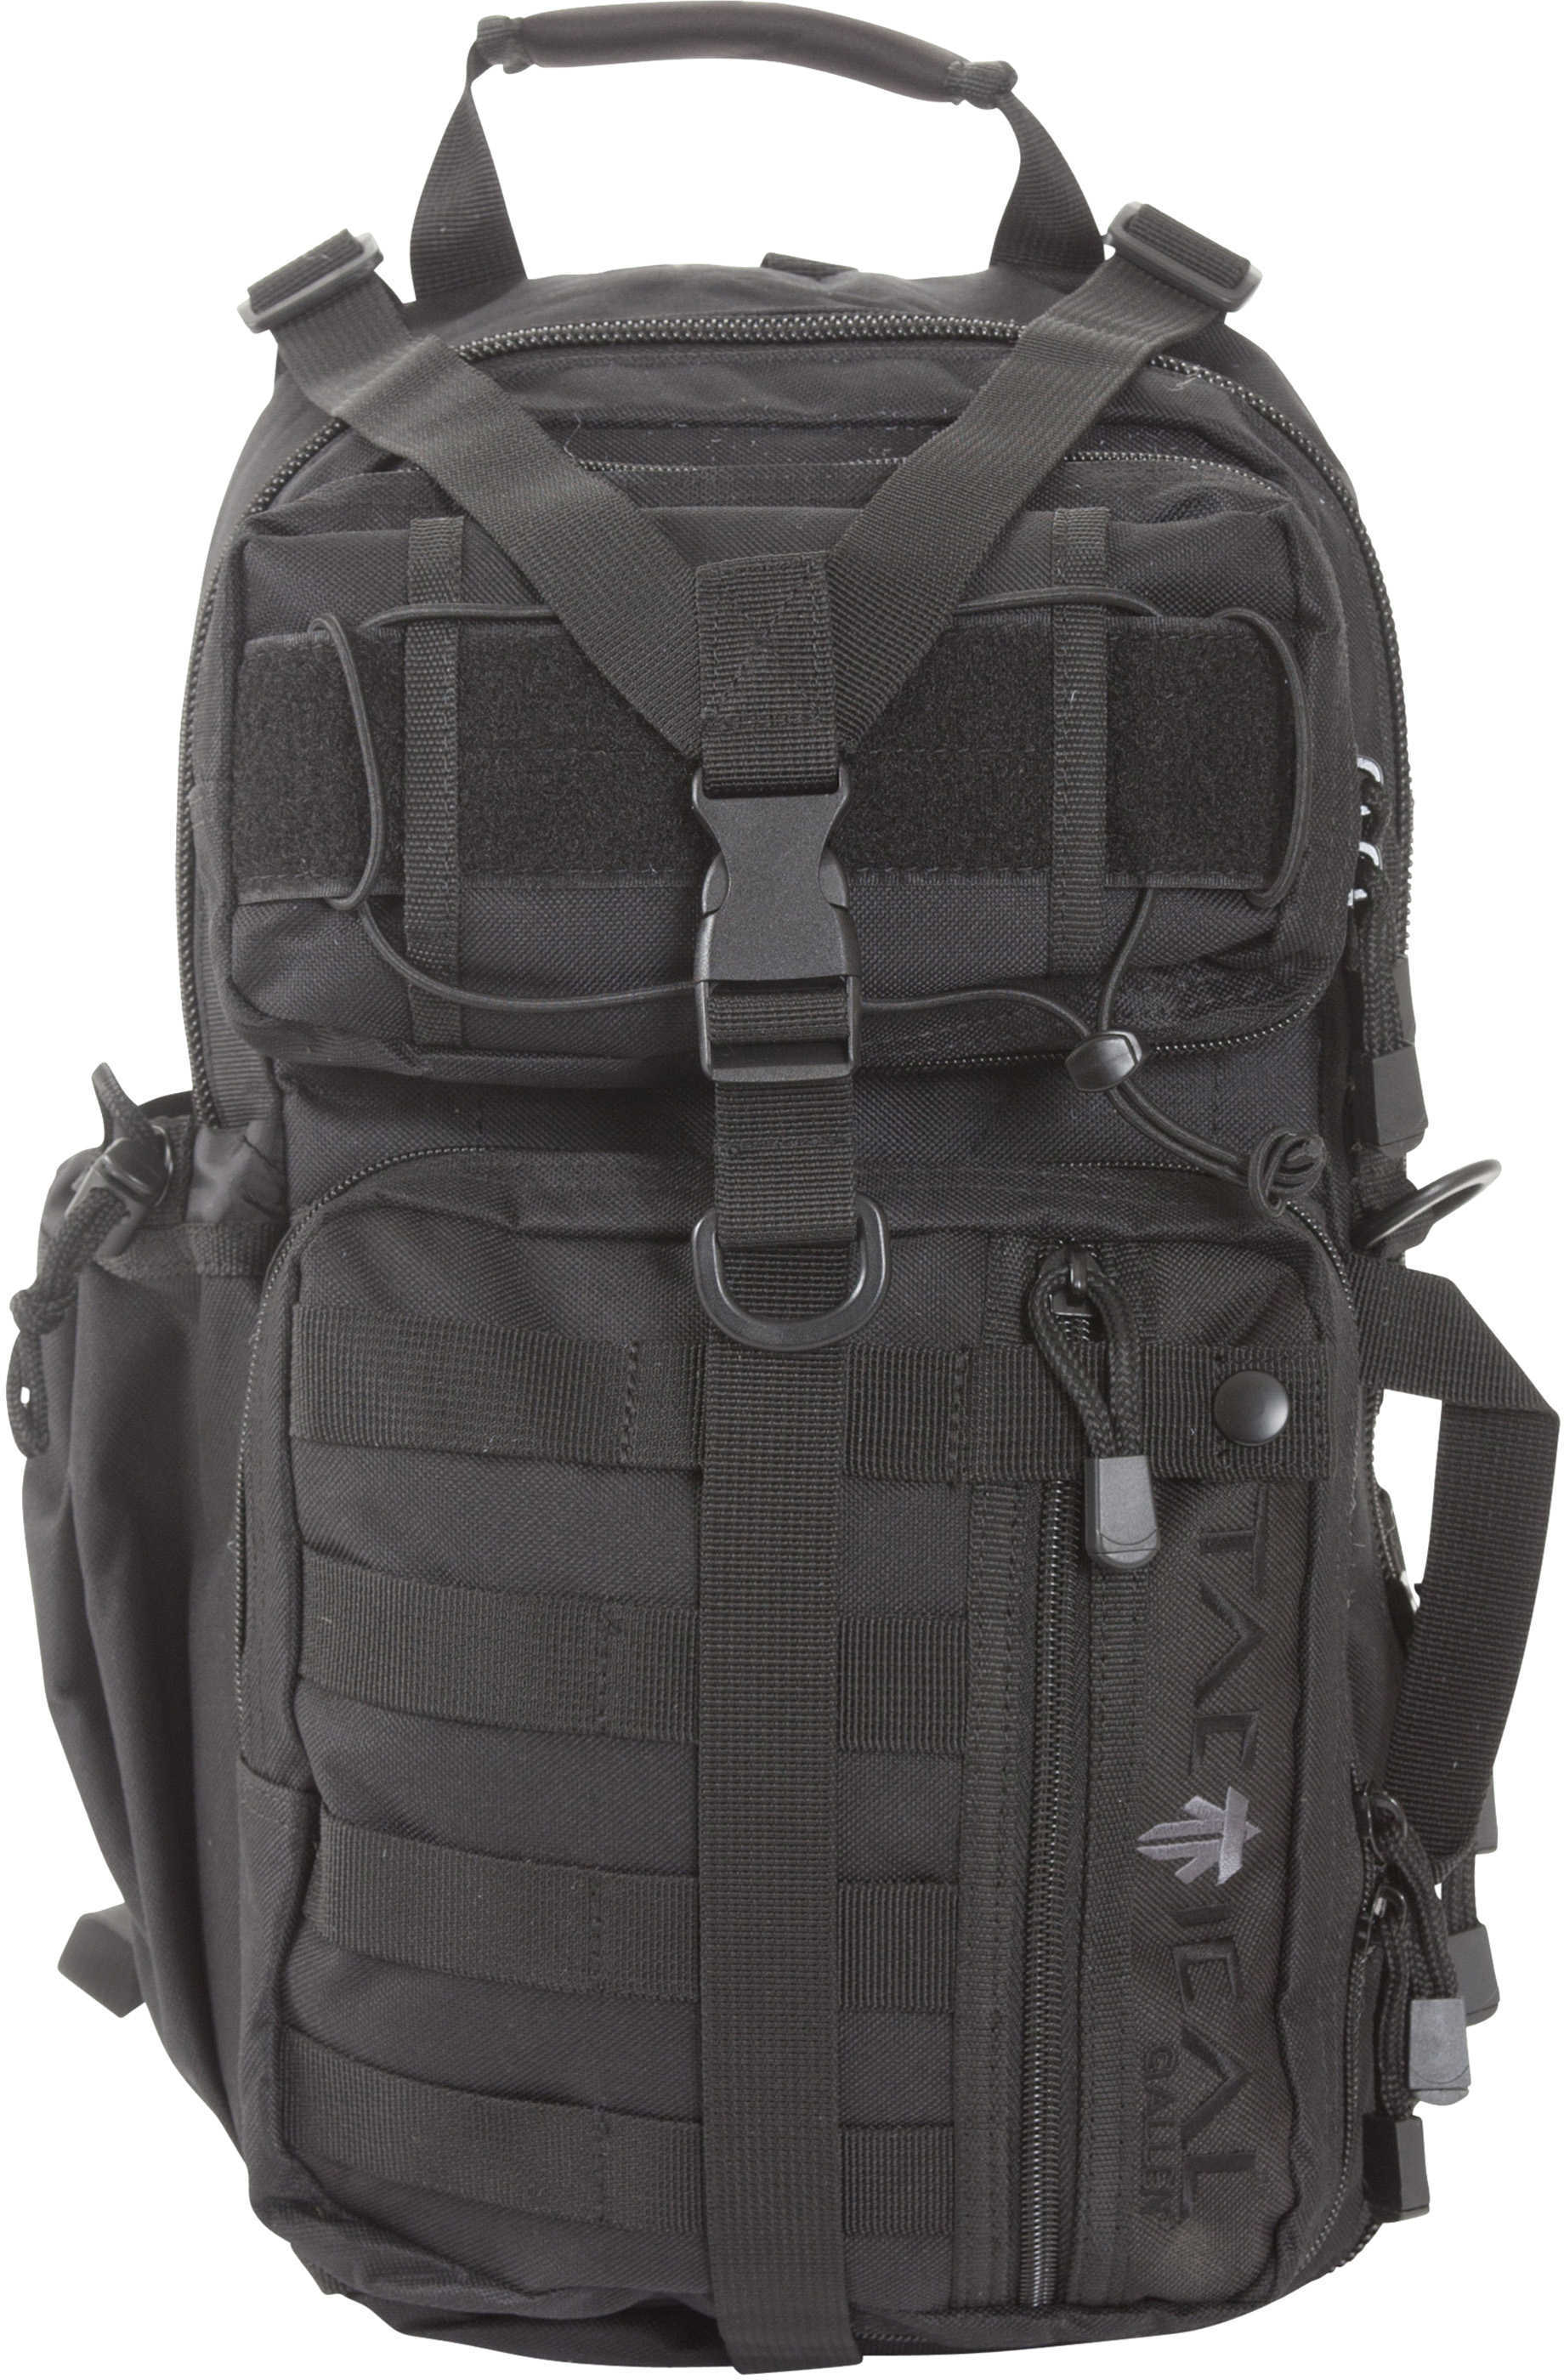 Allen Lite Force Tactical Sling Pack Black Endura Fabric 18"x9.75"x7.5" 1200 Cubic Inches Design Padded Adjustable